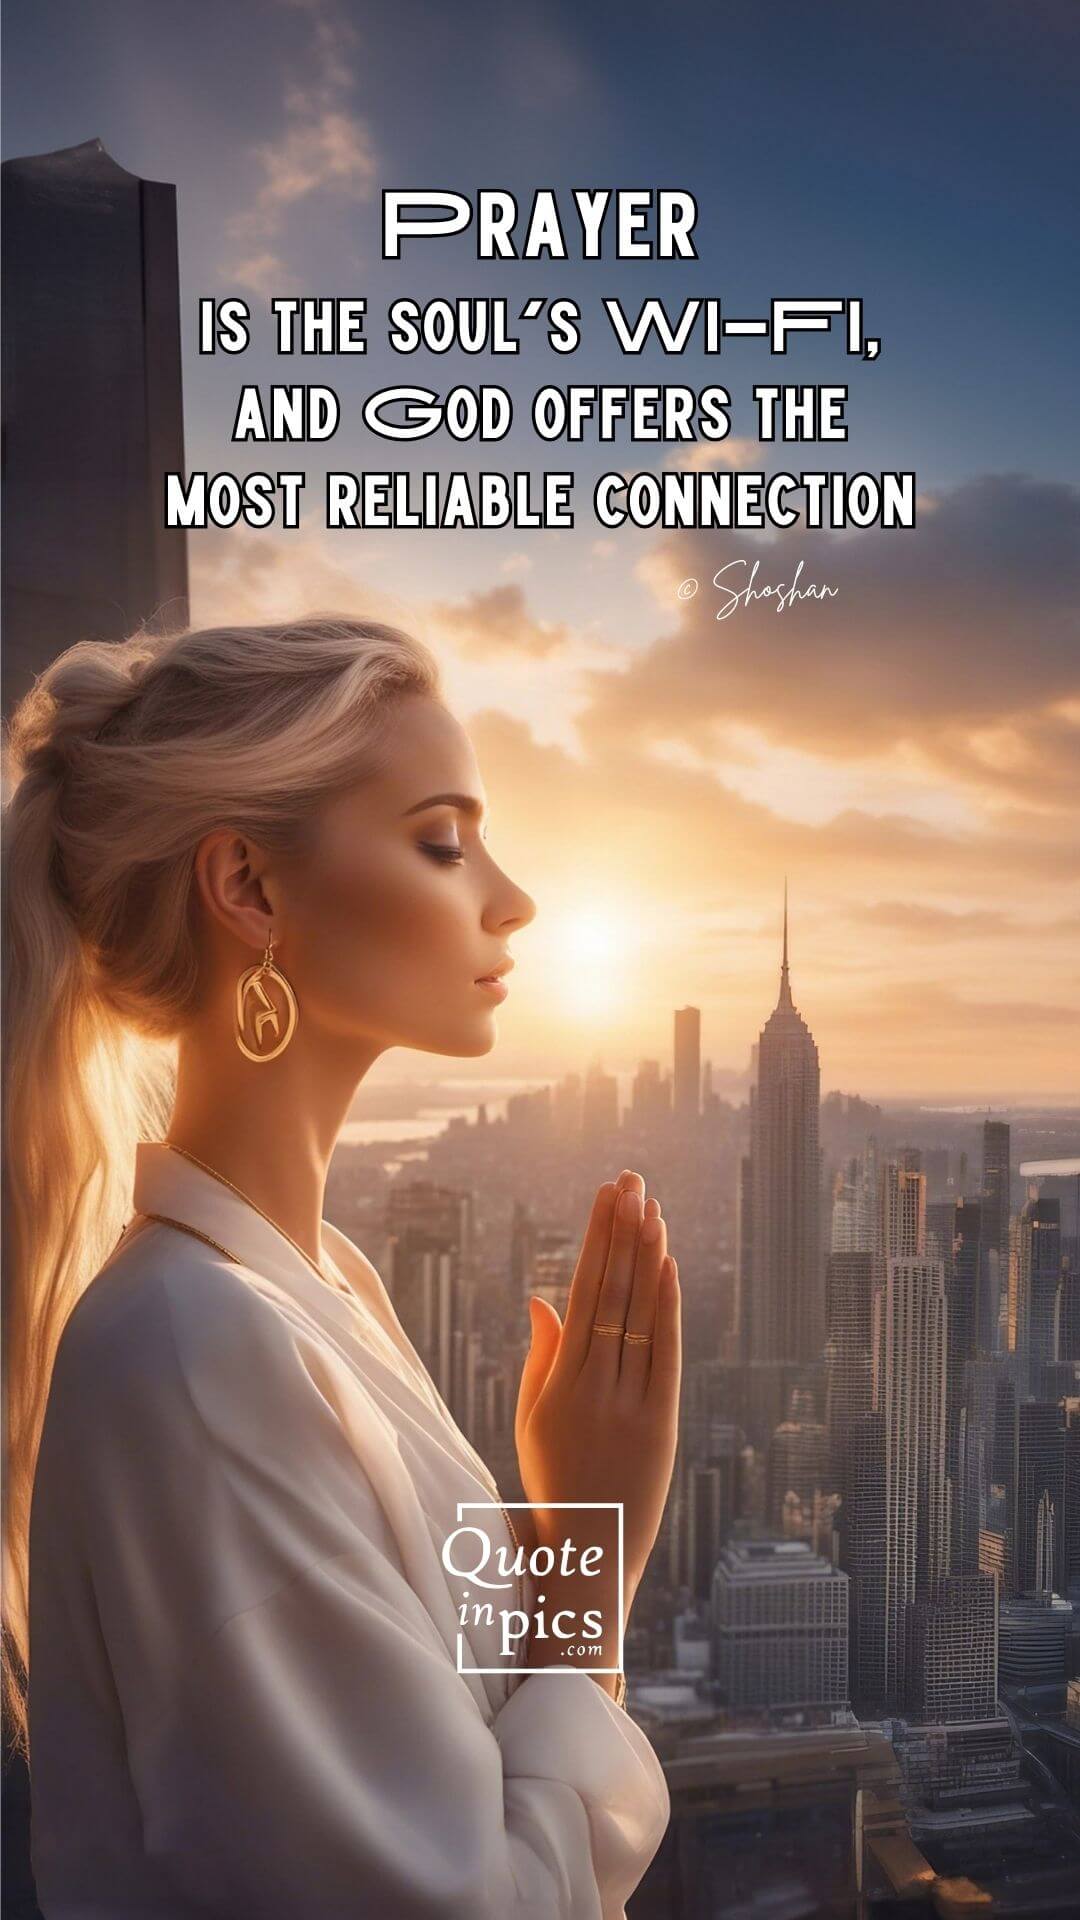 Prayer is the soul's Wi-Fi, and God offers the most reliable connection